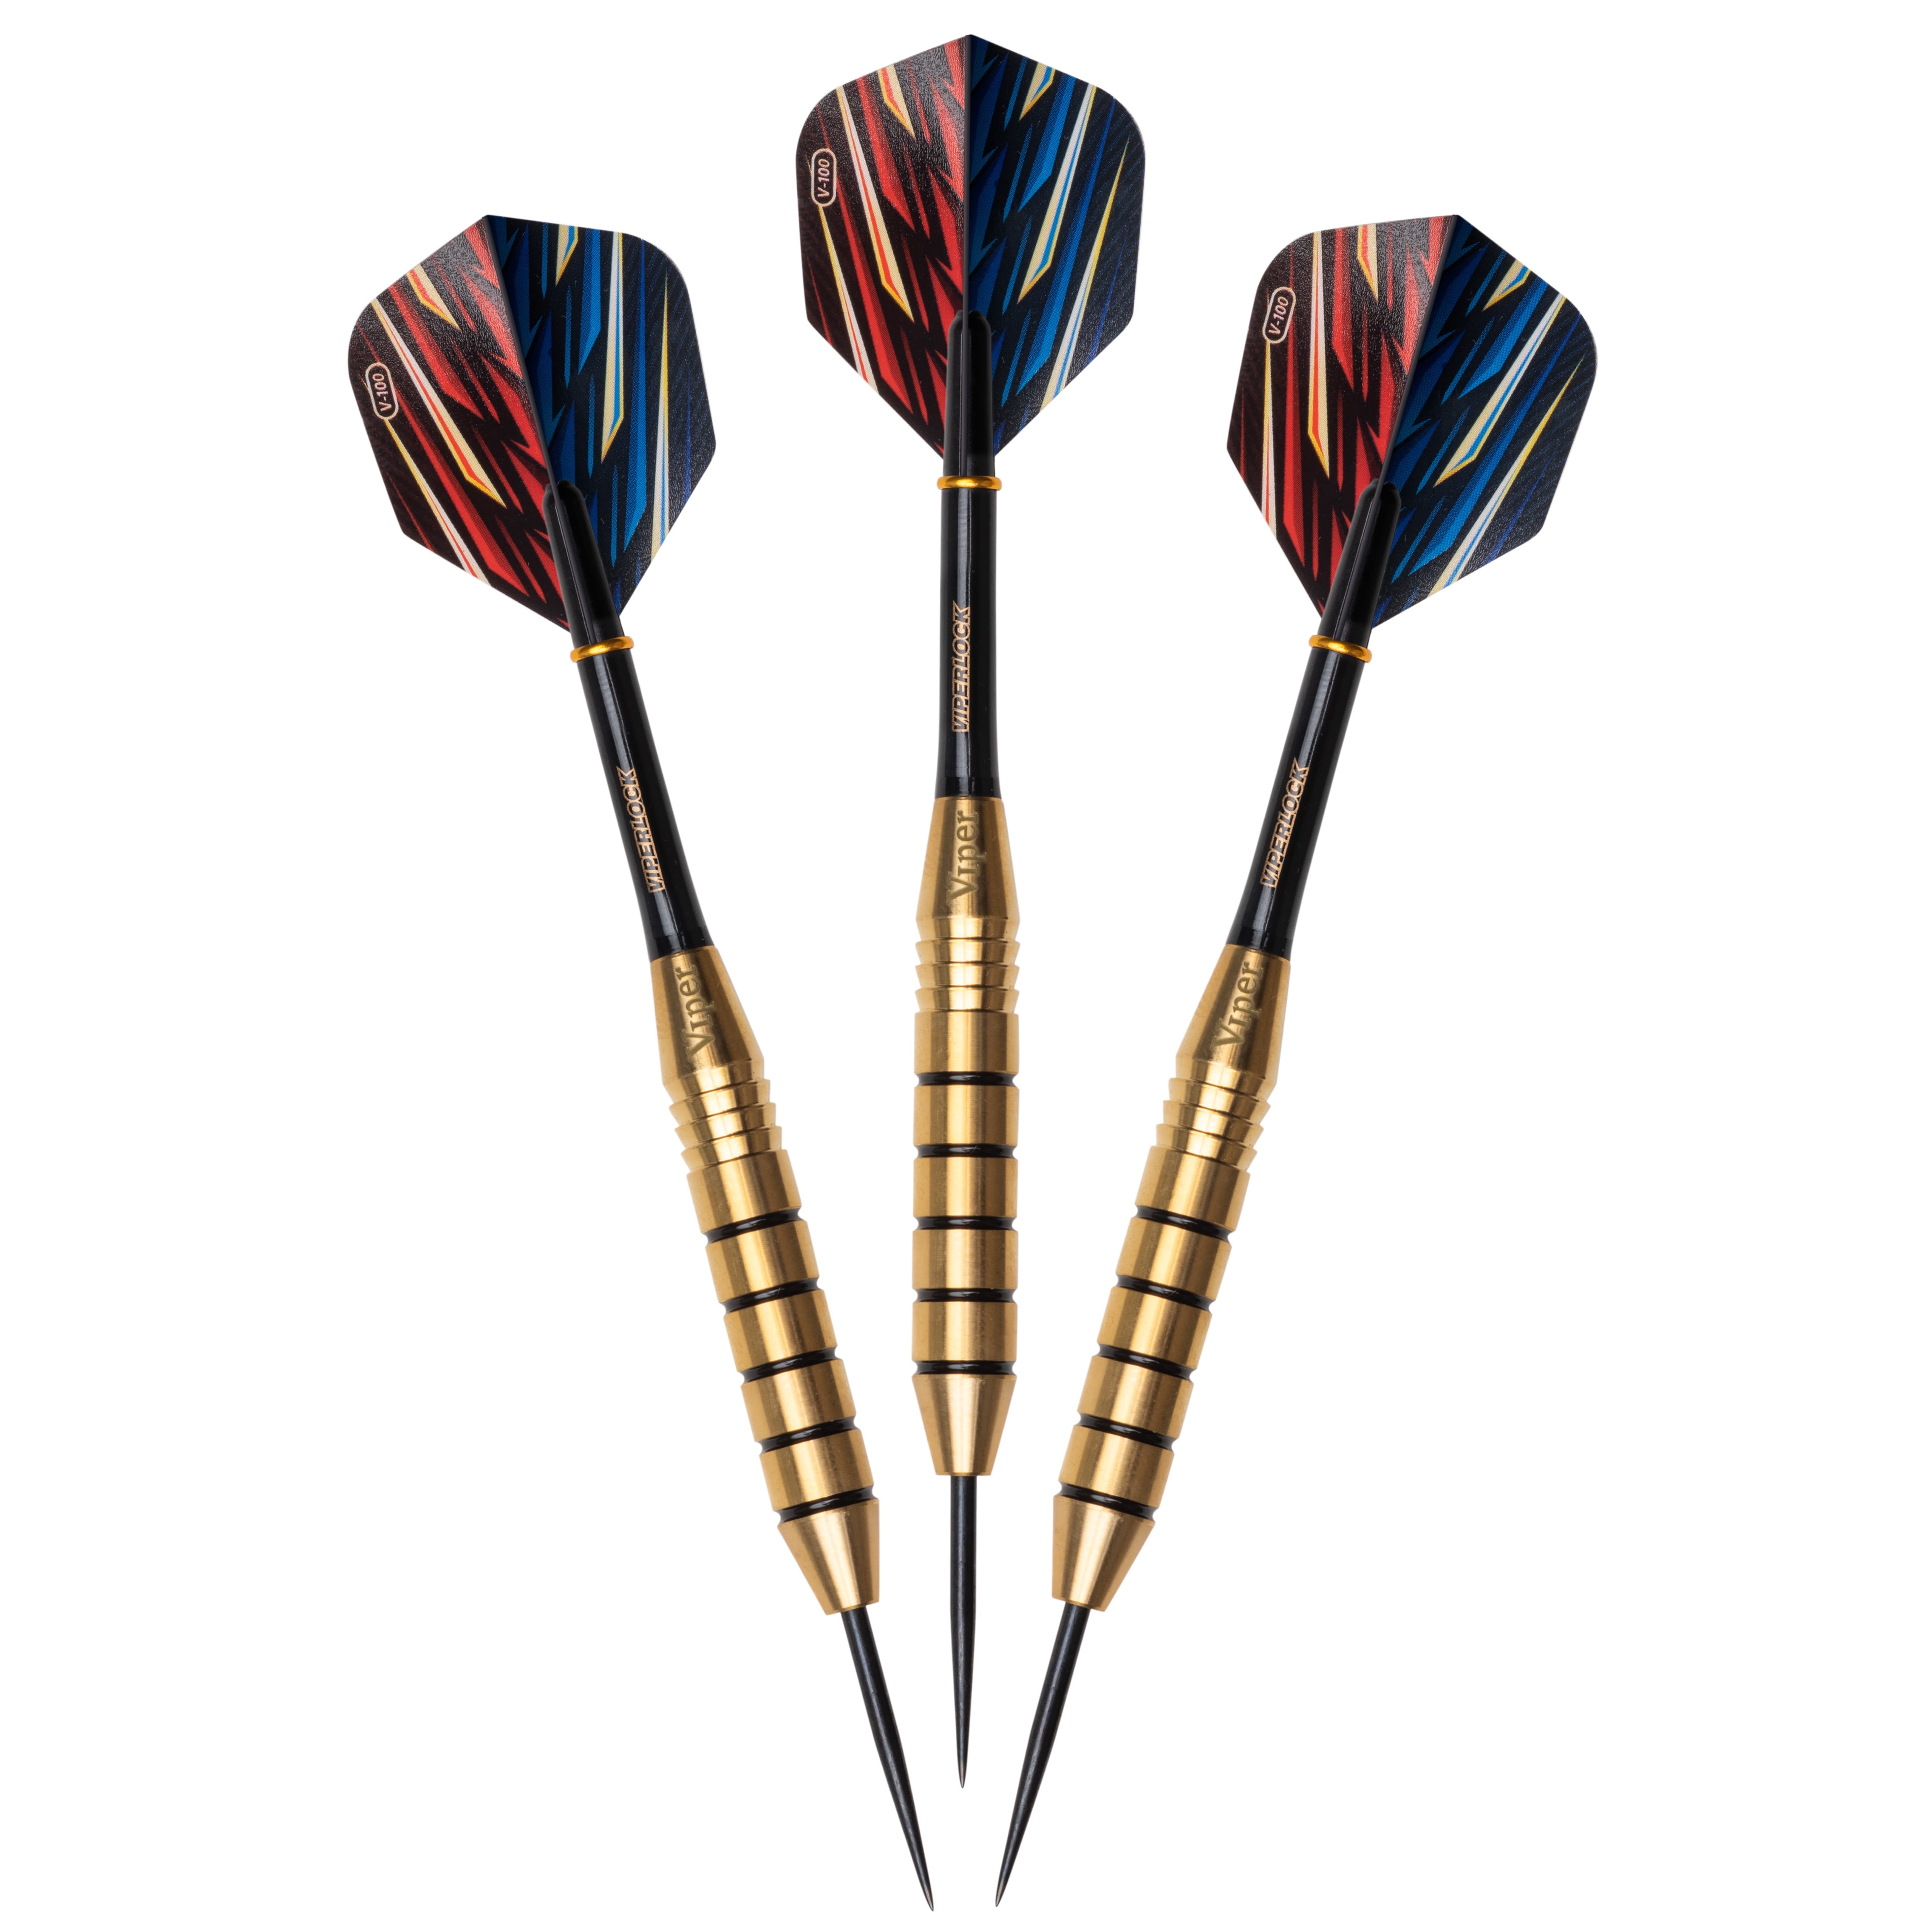 Narwhal Tournament Darts Soft Tip 18g BRAND With Extras X2 Electronic Board Hg6 for sale online 